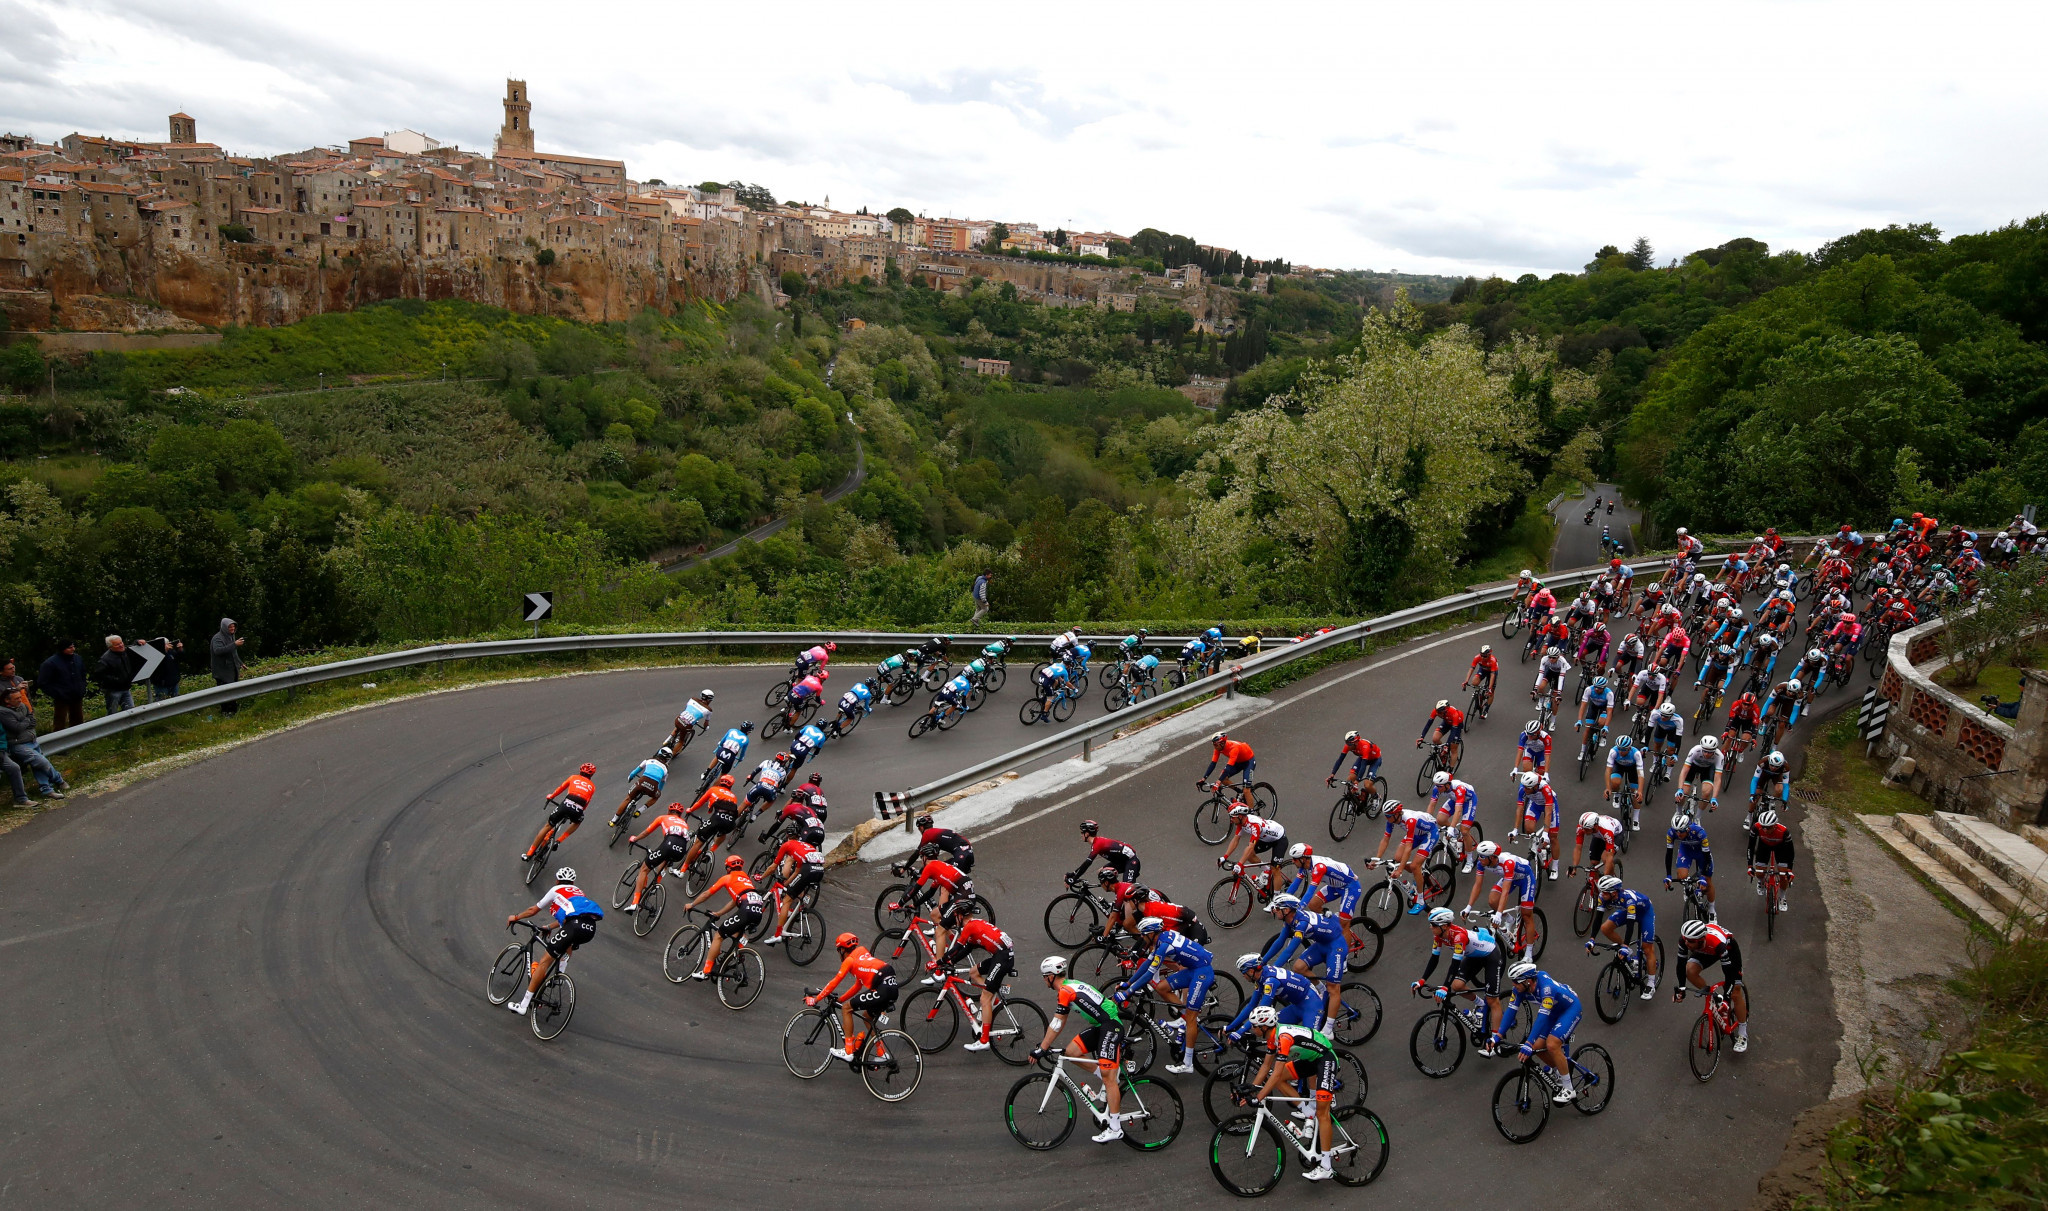 Tuscany and Emilia-Romagna launch joint bid to host Tour de France Grand Depart